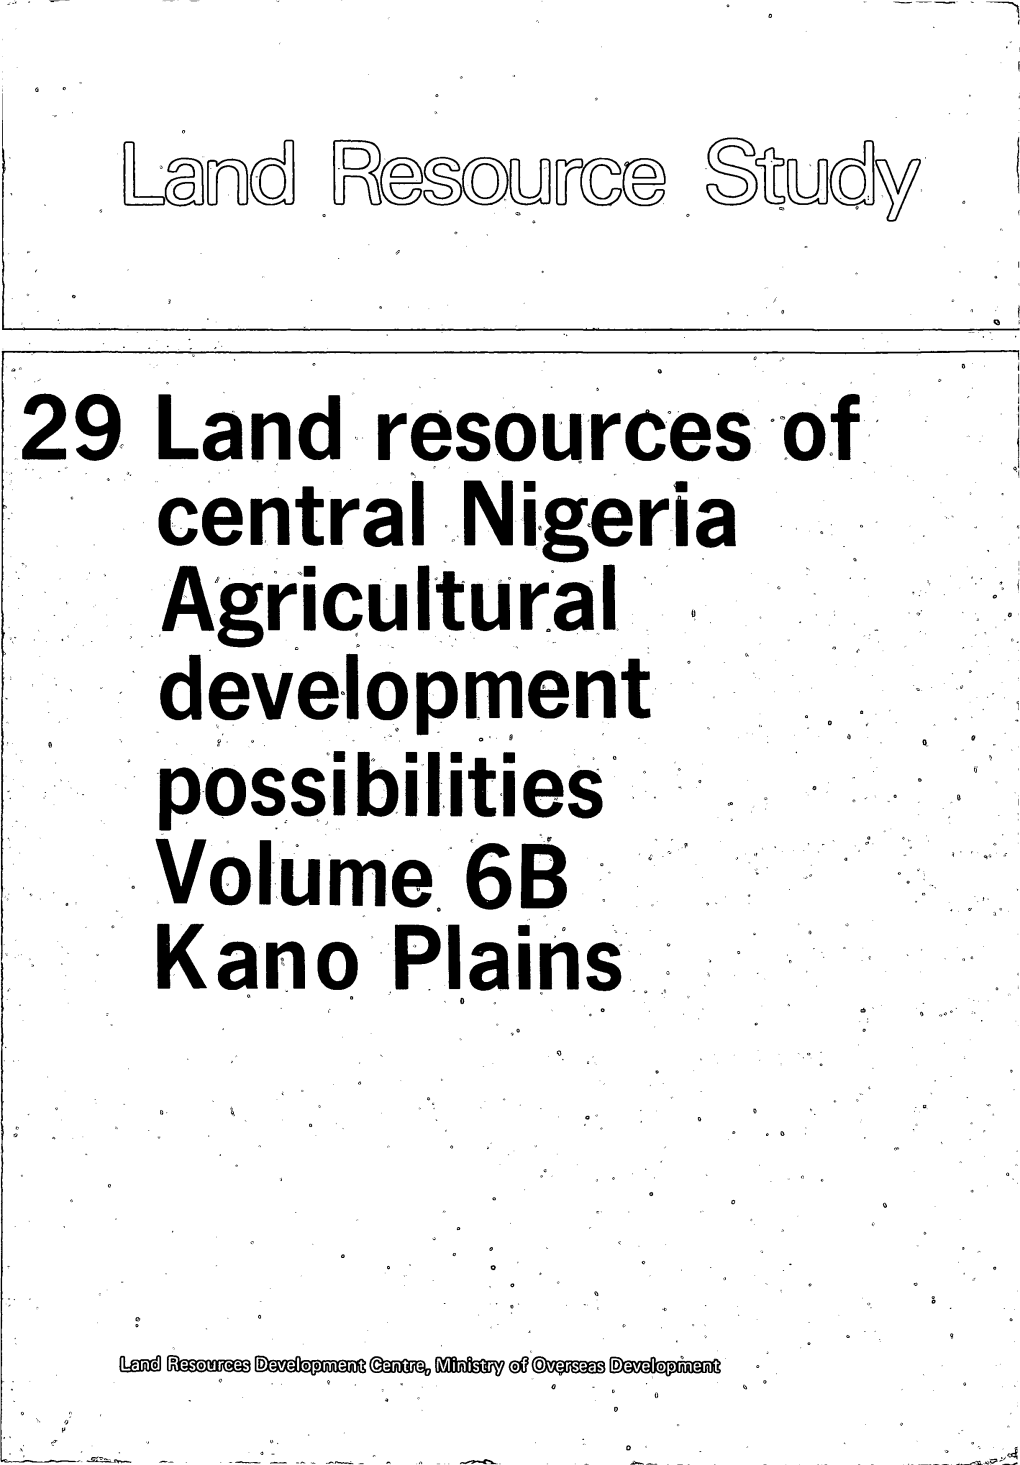 29 Land Resources of Central Nigeria Agricultural Deveippment Possibilities Volume 6B Kano Plains ° °